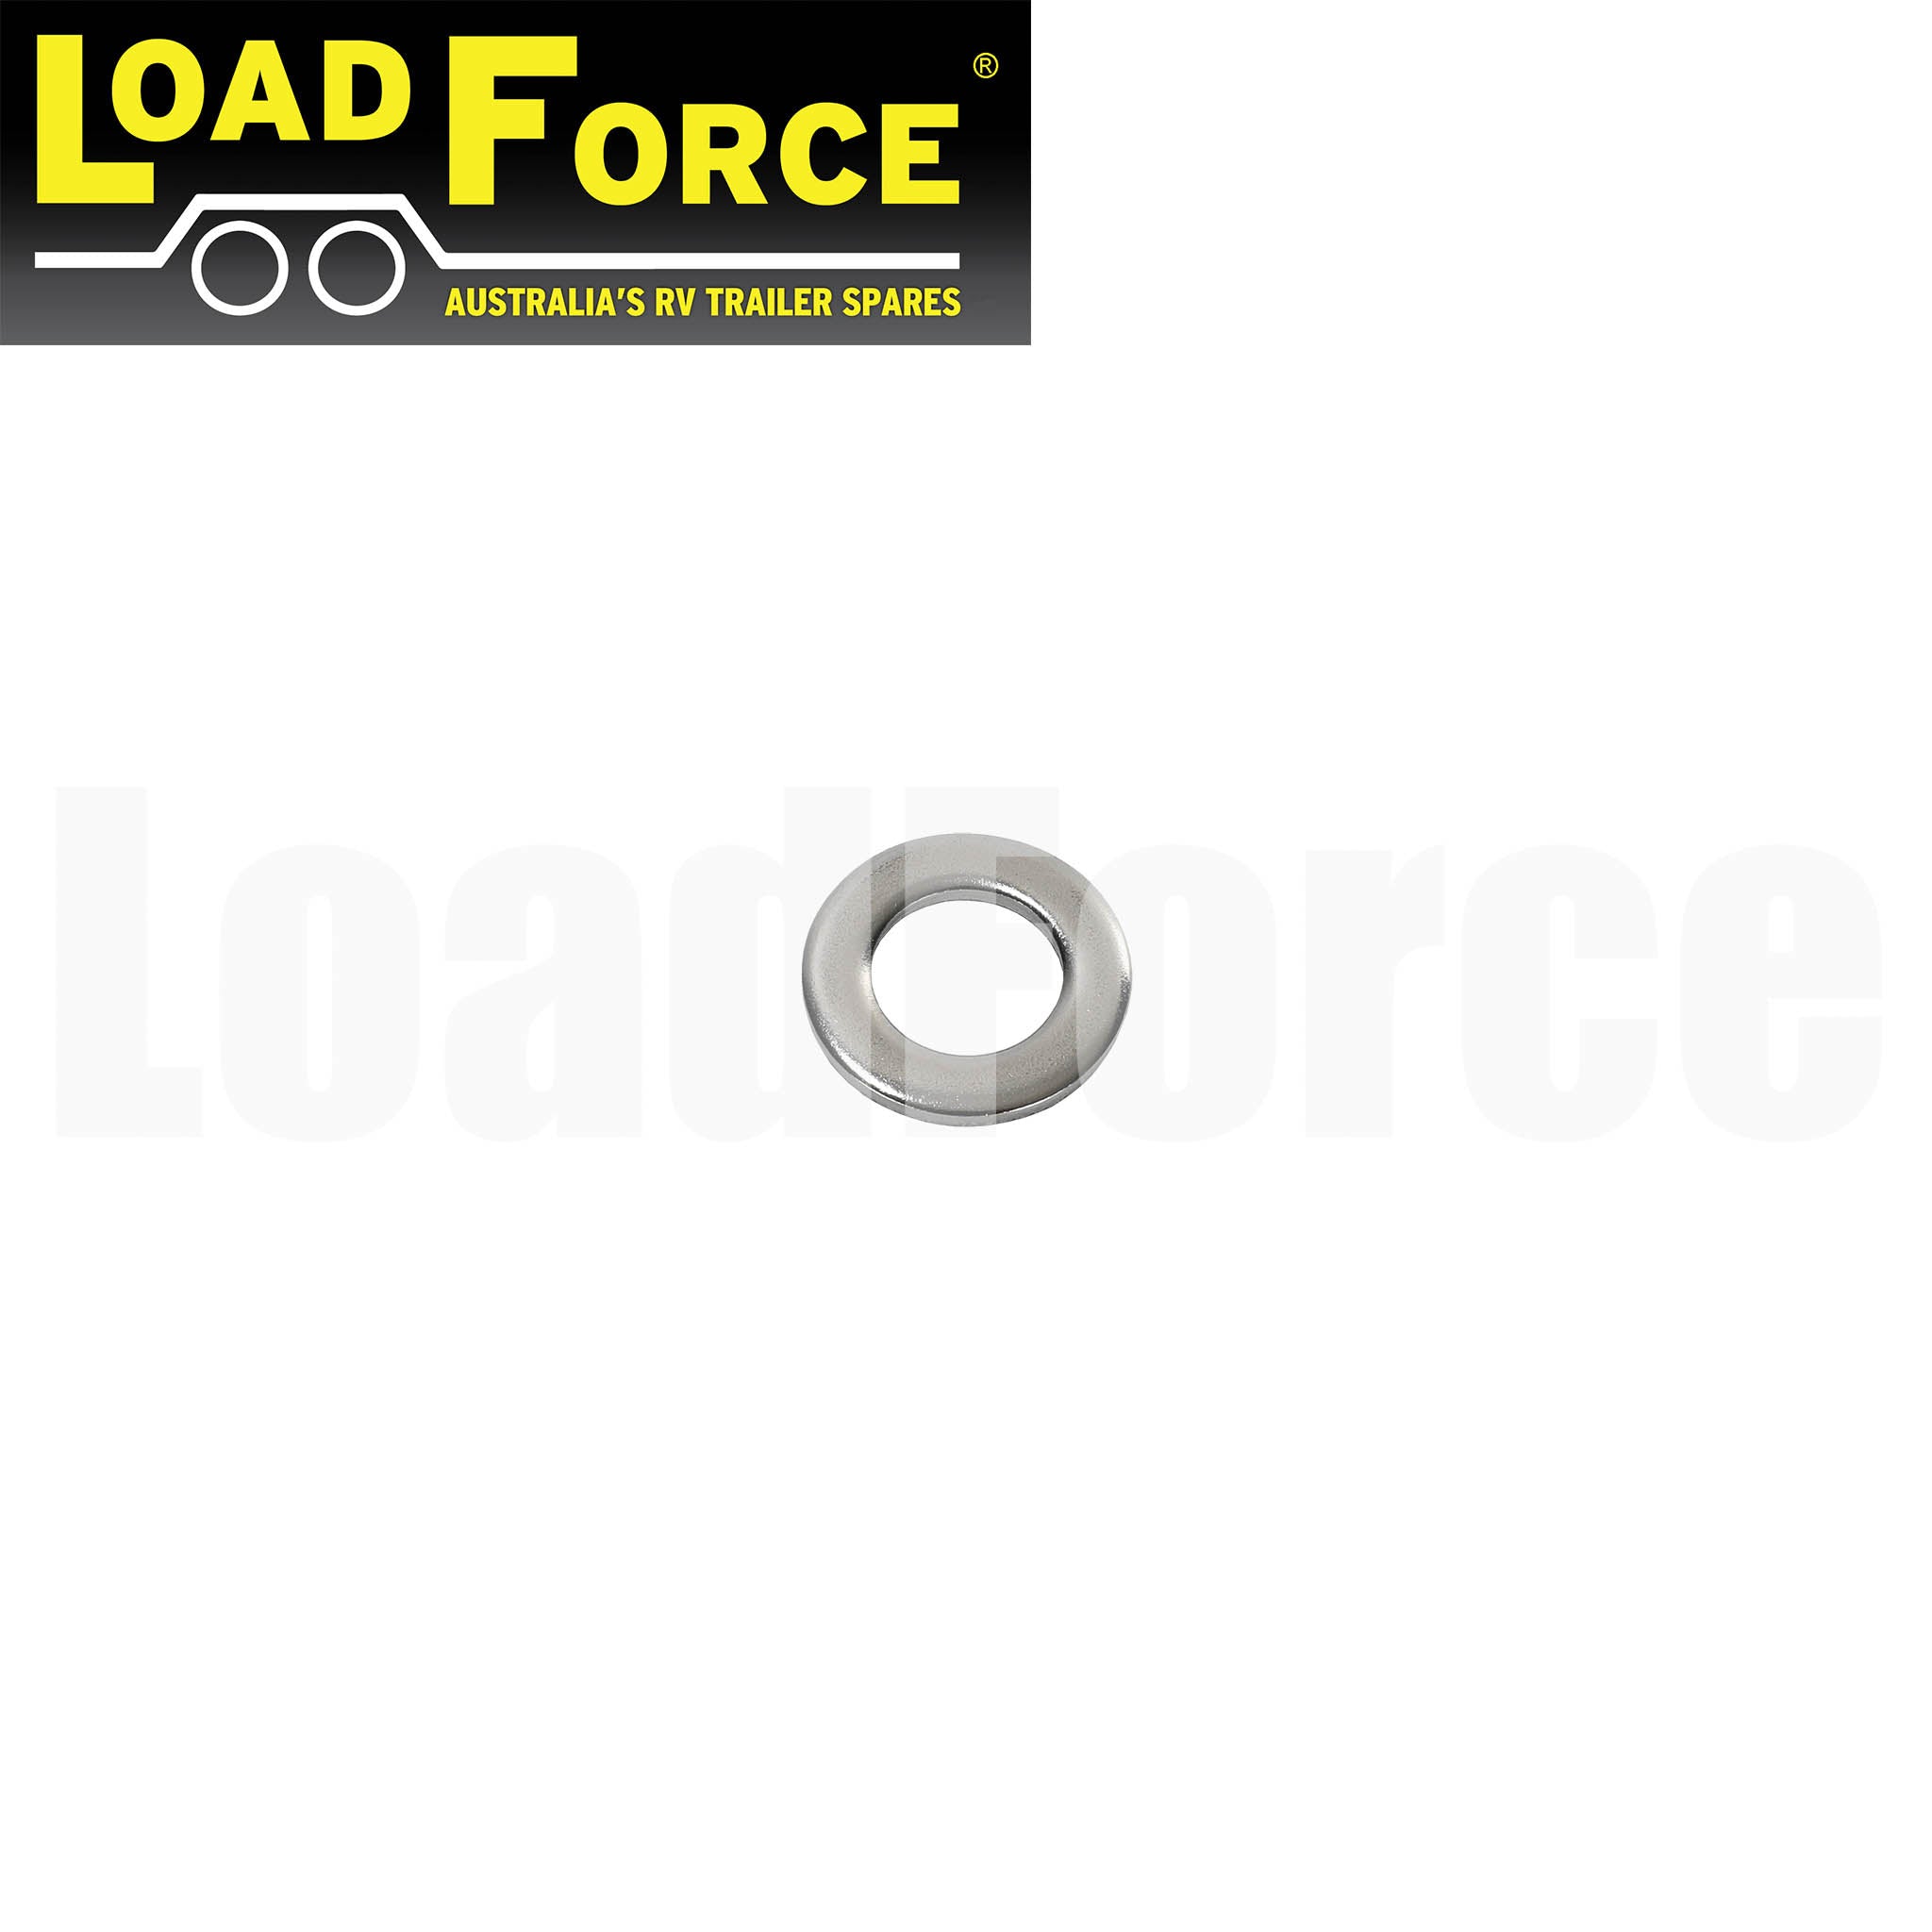 Boat Trailer Roller Spindle Washer Suit 16mm Stainless Steel